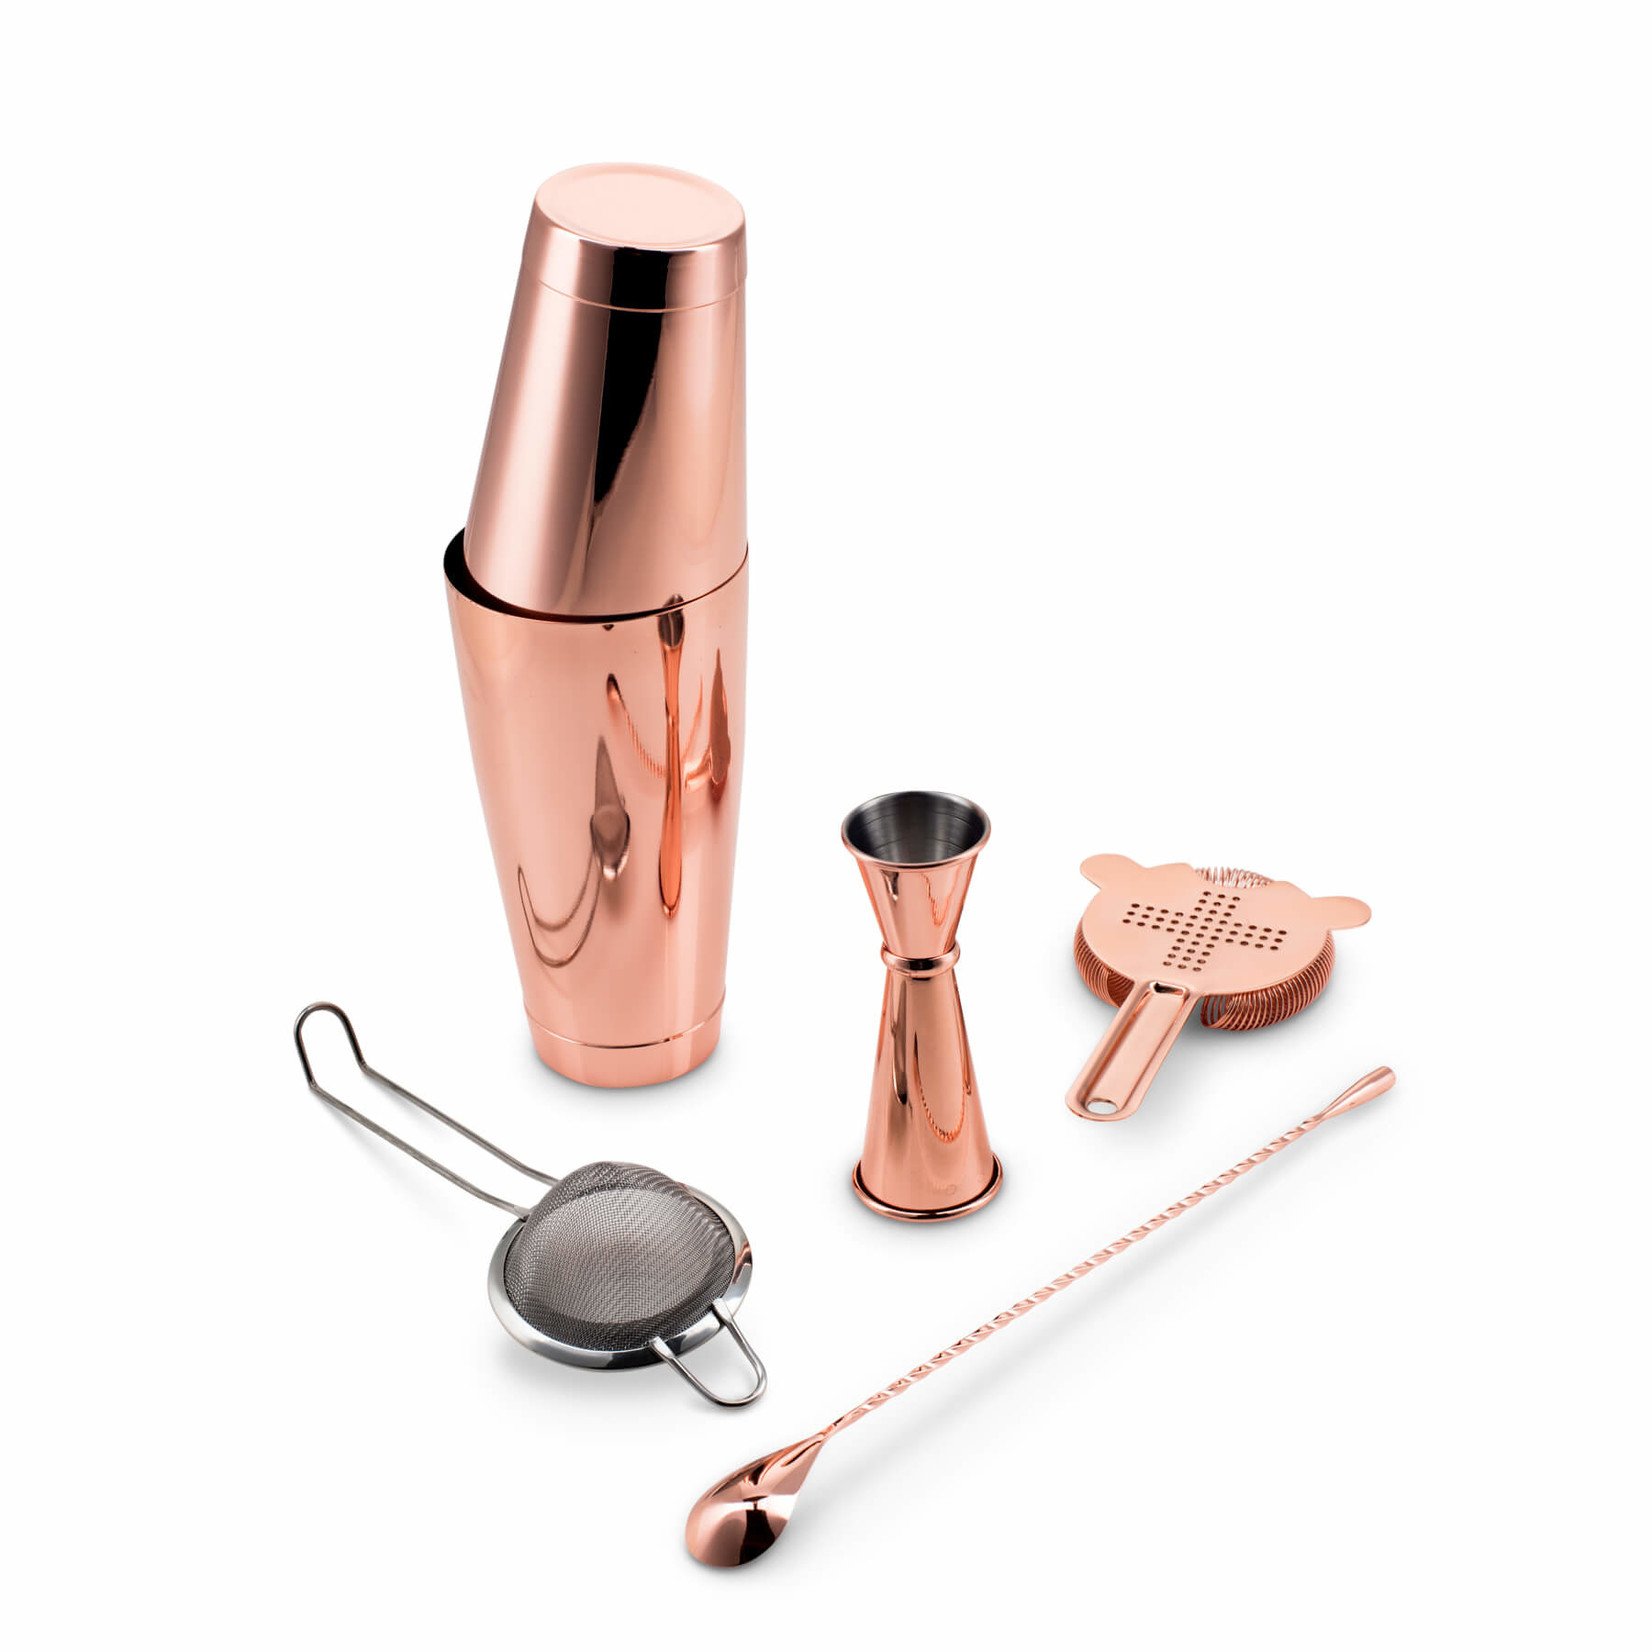 Cocktail Kit Copper 6 Piece in Gift Box